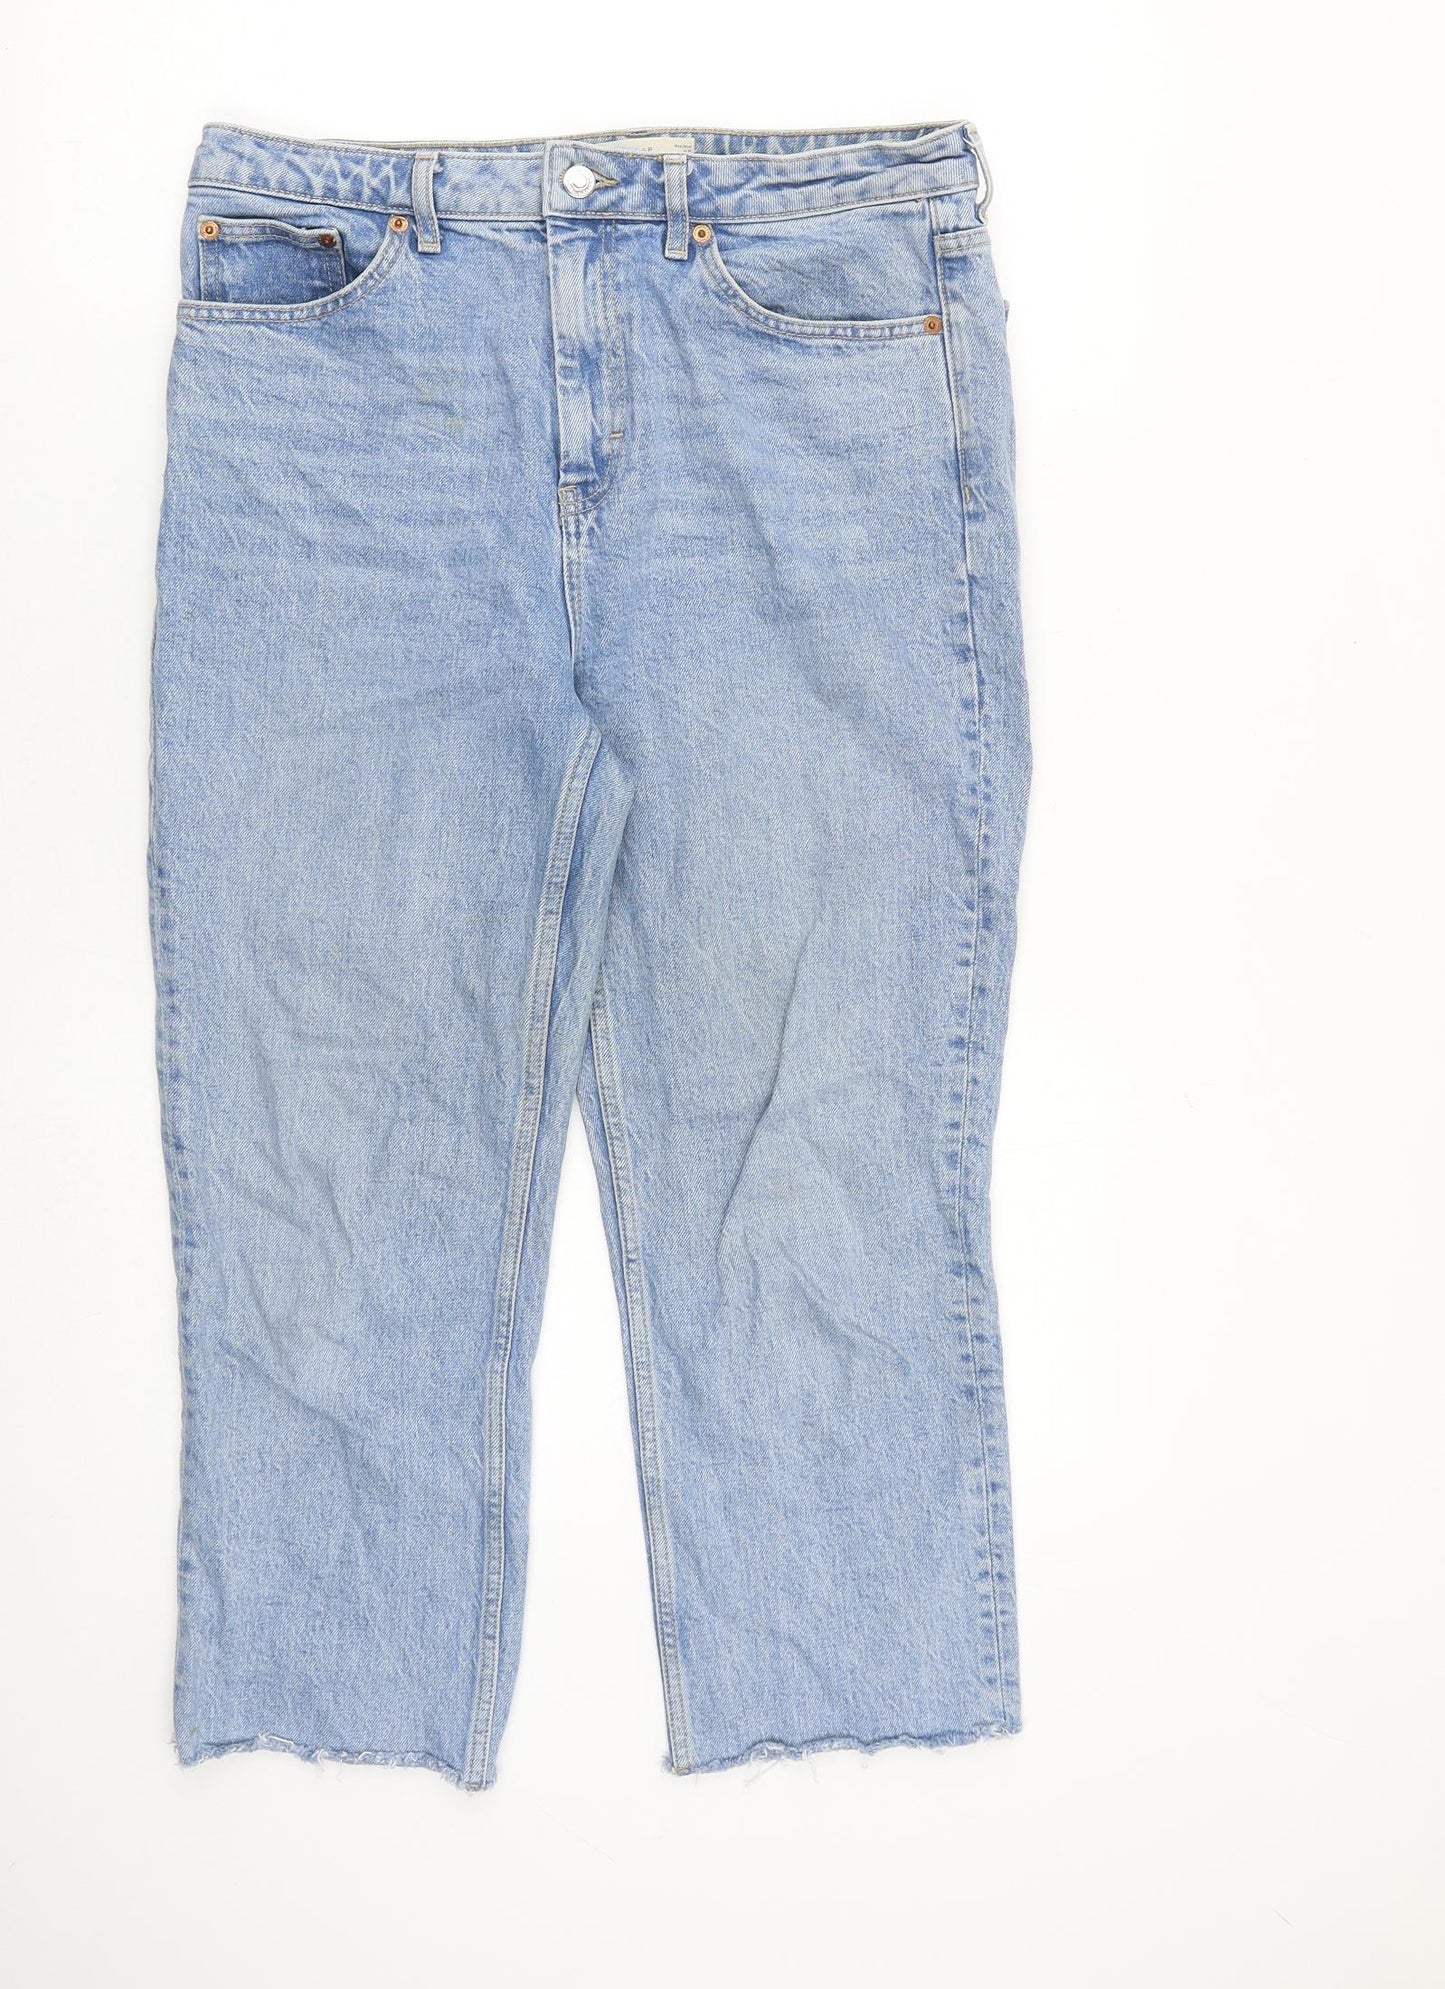 Topshop Womens Blue Cotton Cropped Jeans Size 32 in L24 in Regular Zip - Raw Hem